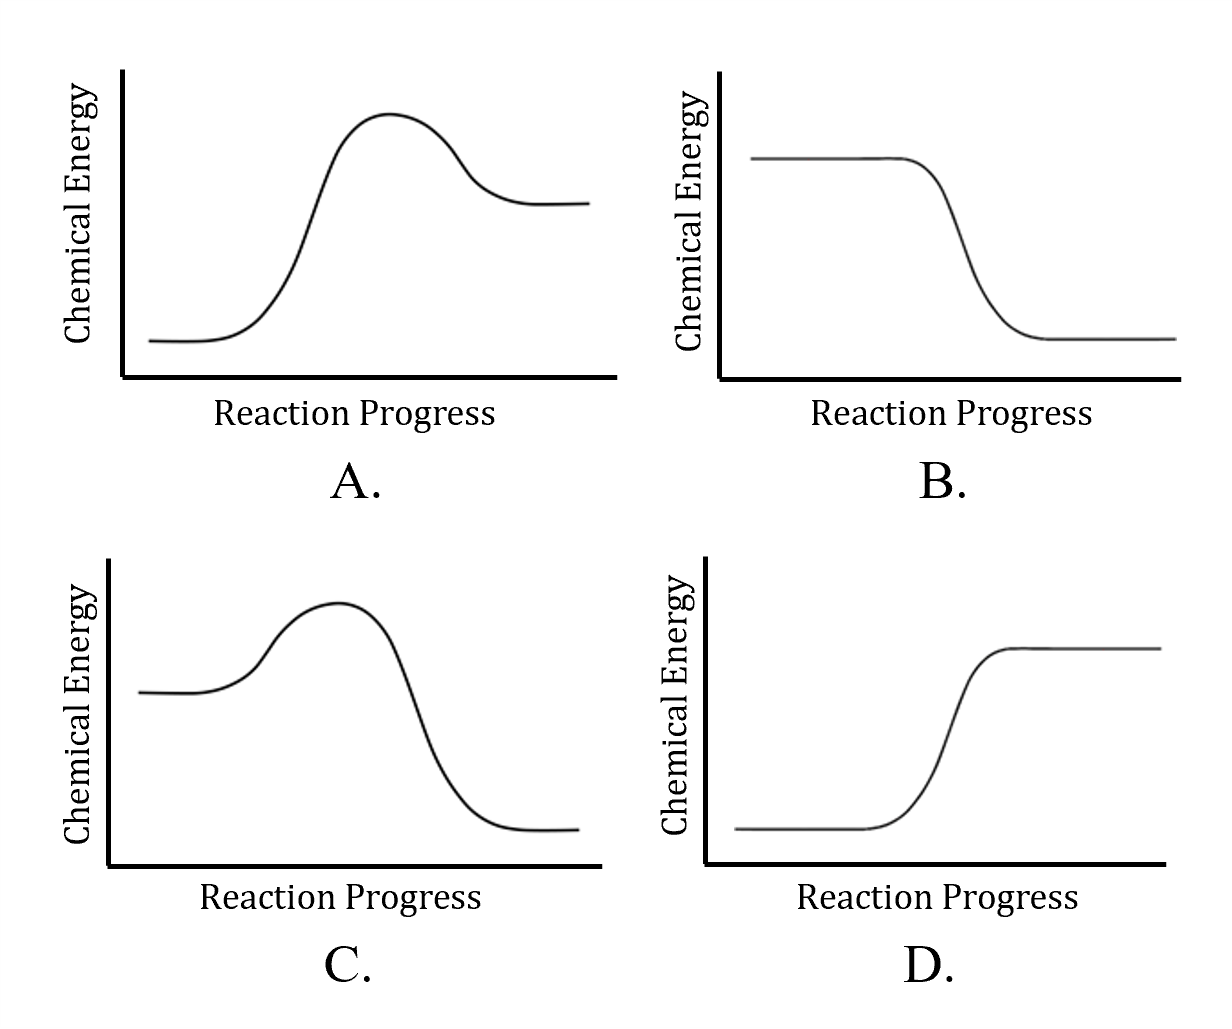 Four reaction coordinate diagrams are shown. Diagram A shows reactant lower in energy than product, with a transition state higher in energy than both. Diagram B shows reactant higher in energy than product, with no transition state. Diagram C shows reactant higher in energy than product, with a transition state higher in energy than both. Diagram D shows reactant lower in energy than product, with no transition state.